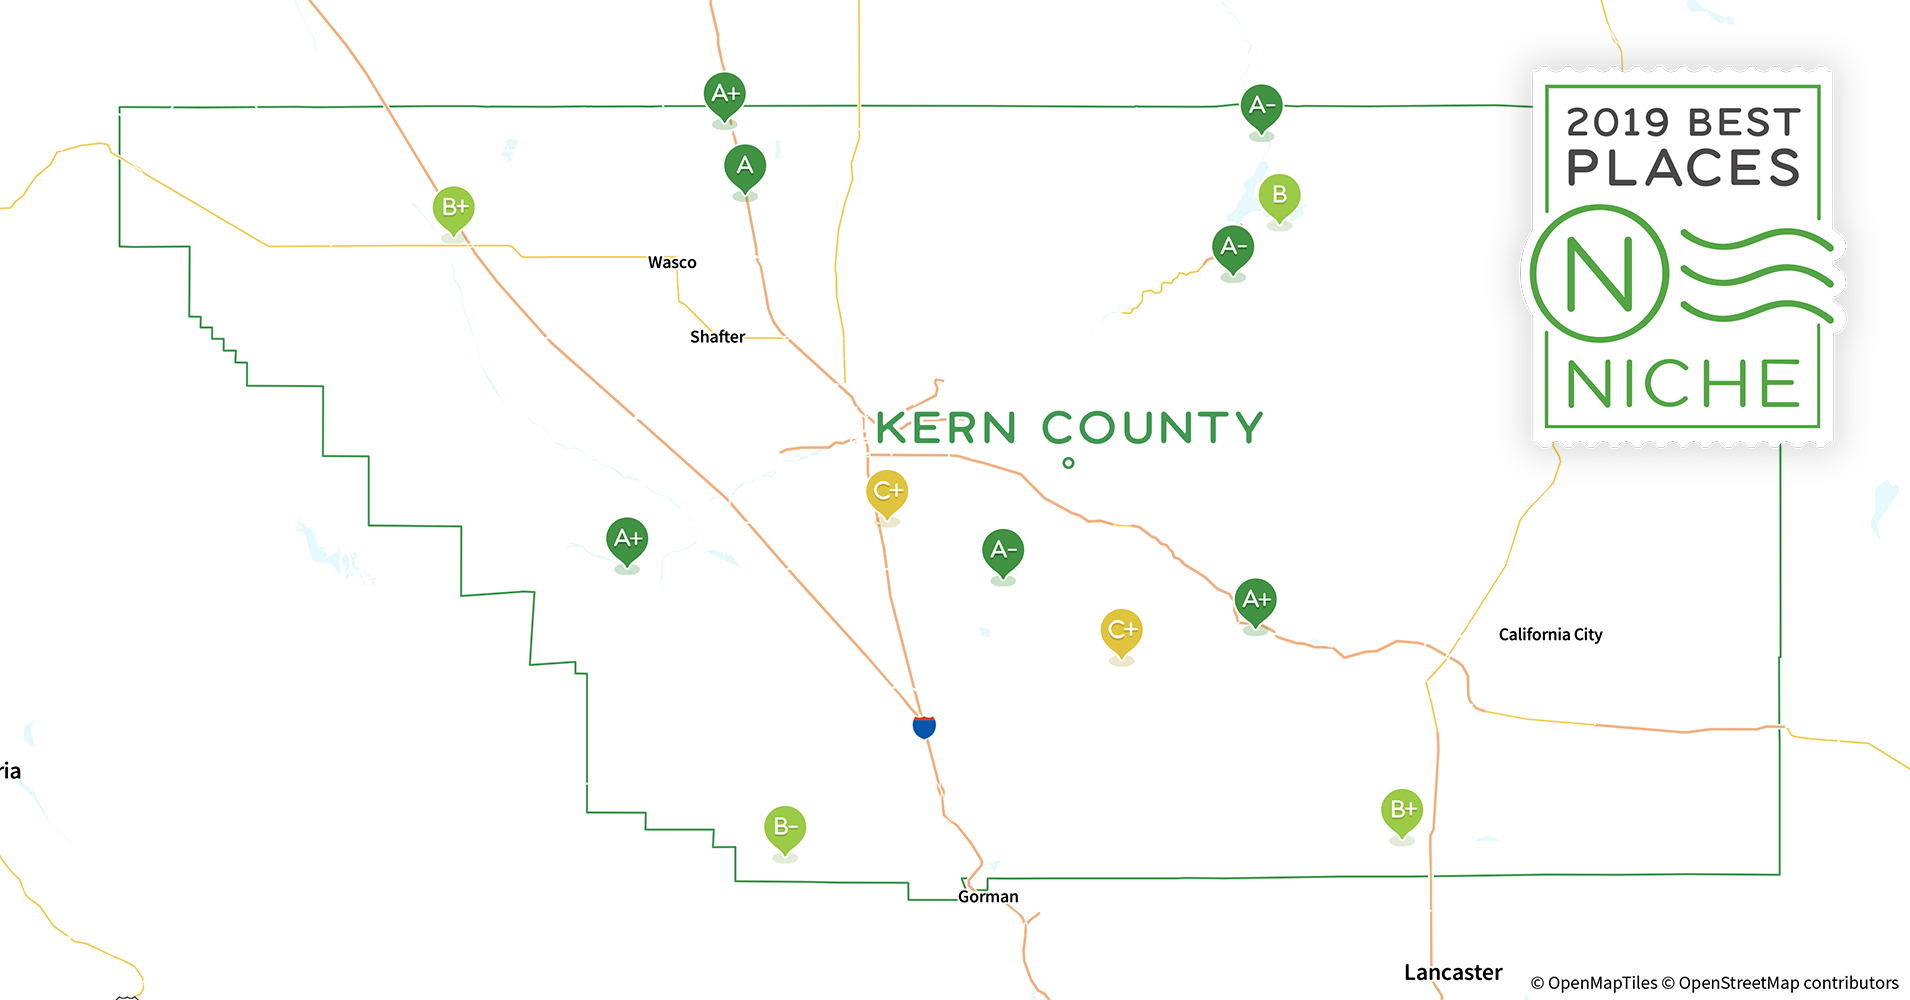 2019 Safe Places To Live In Kern County, Ca - Niche - Taft California Map